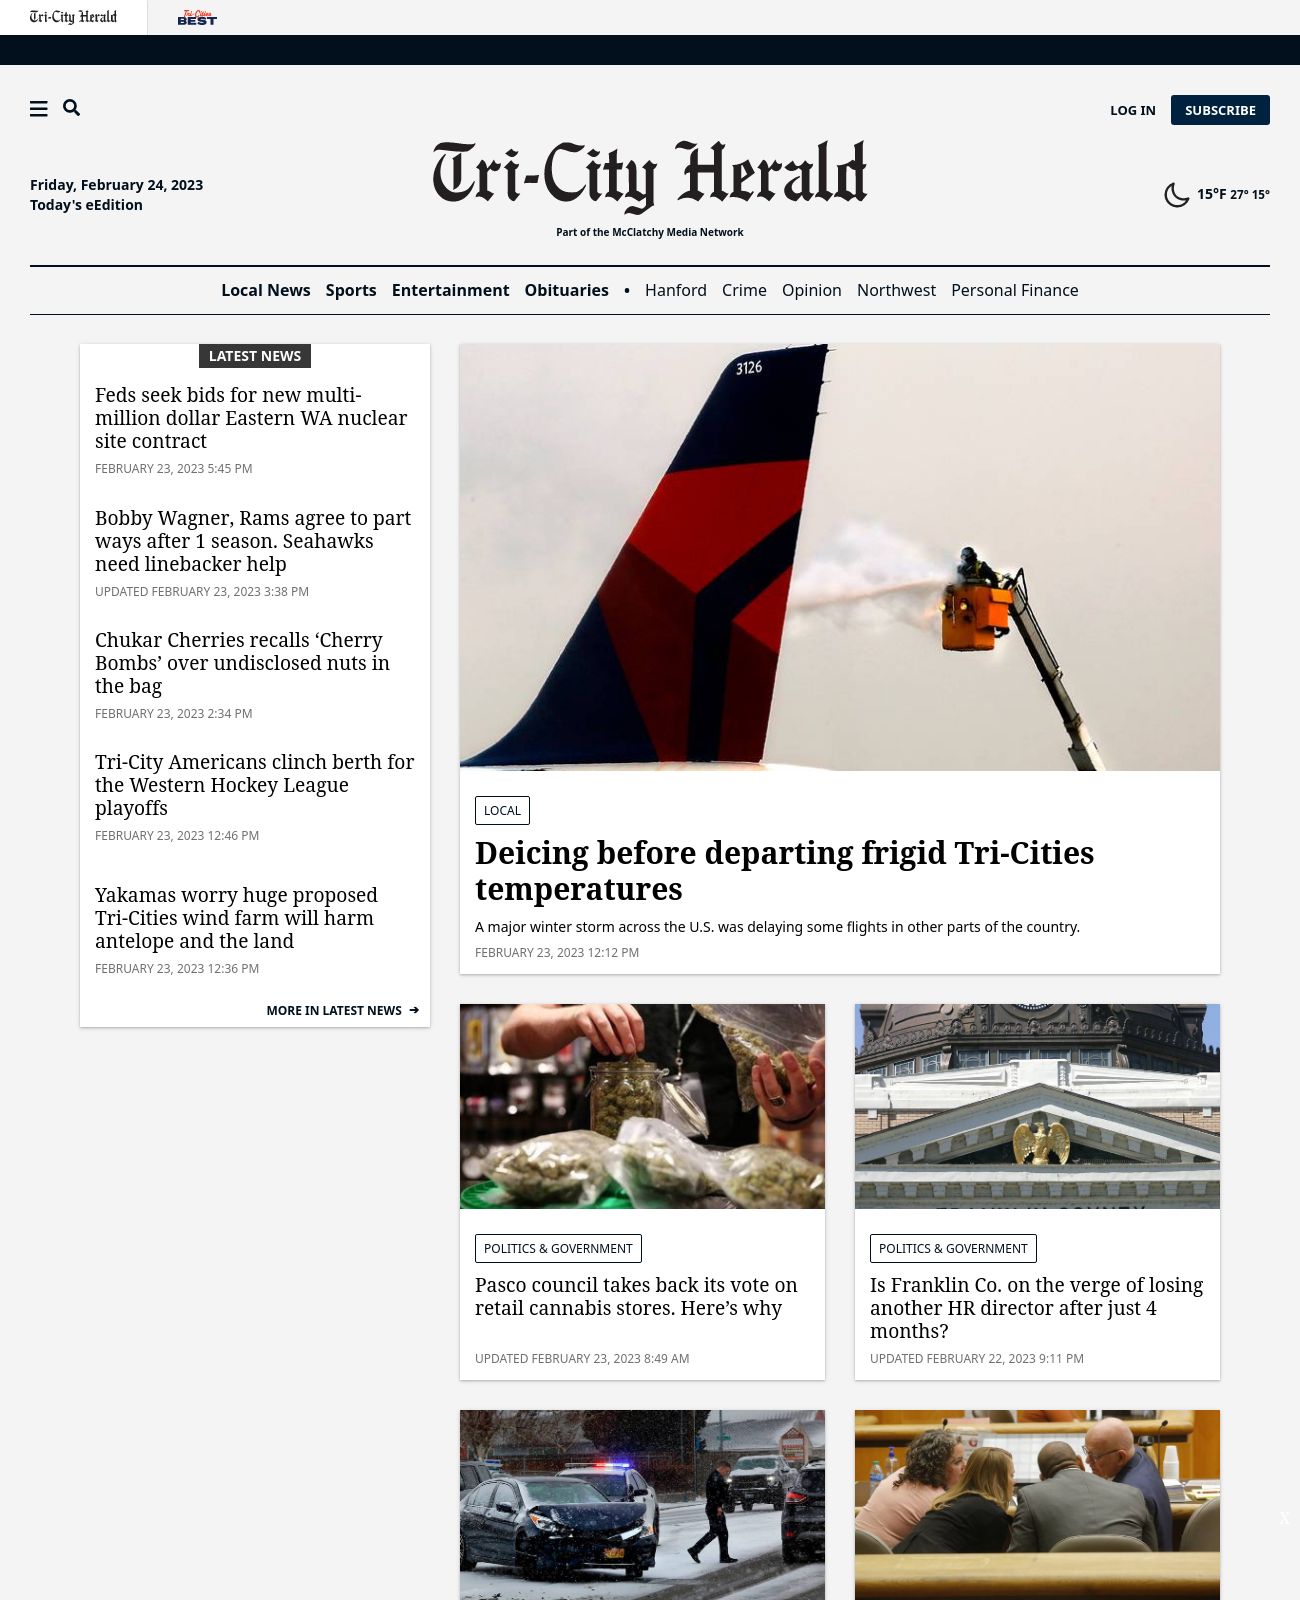 Tri-City Herald at 2023-02-24 04:31:14-08:00 local time